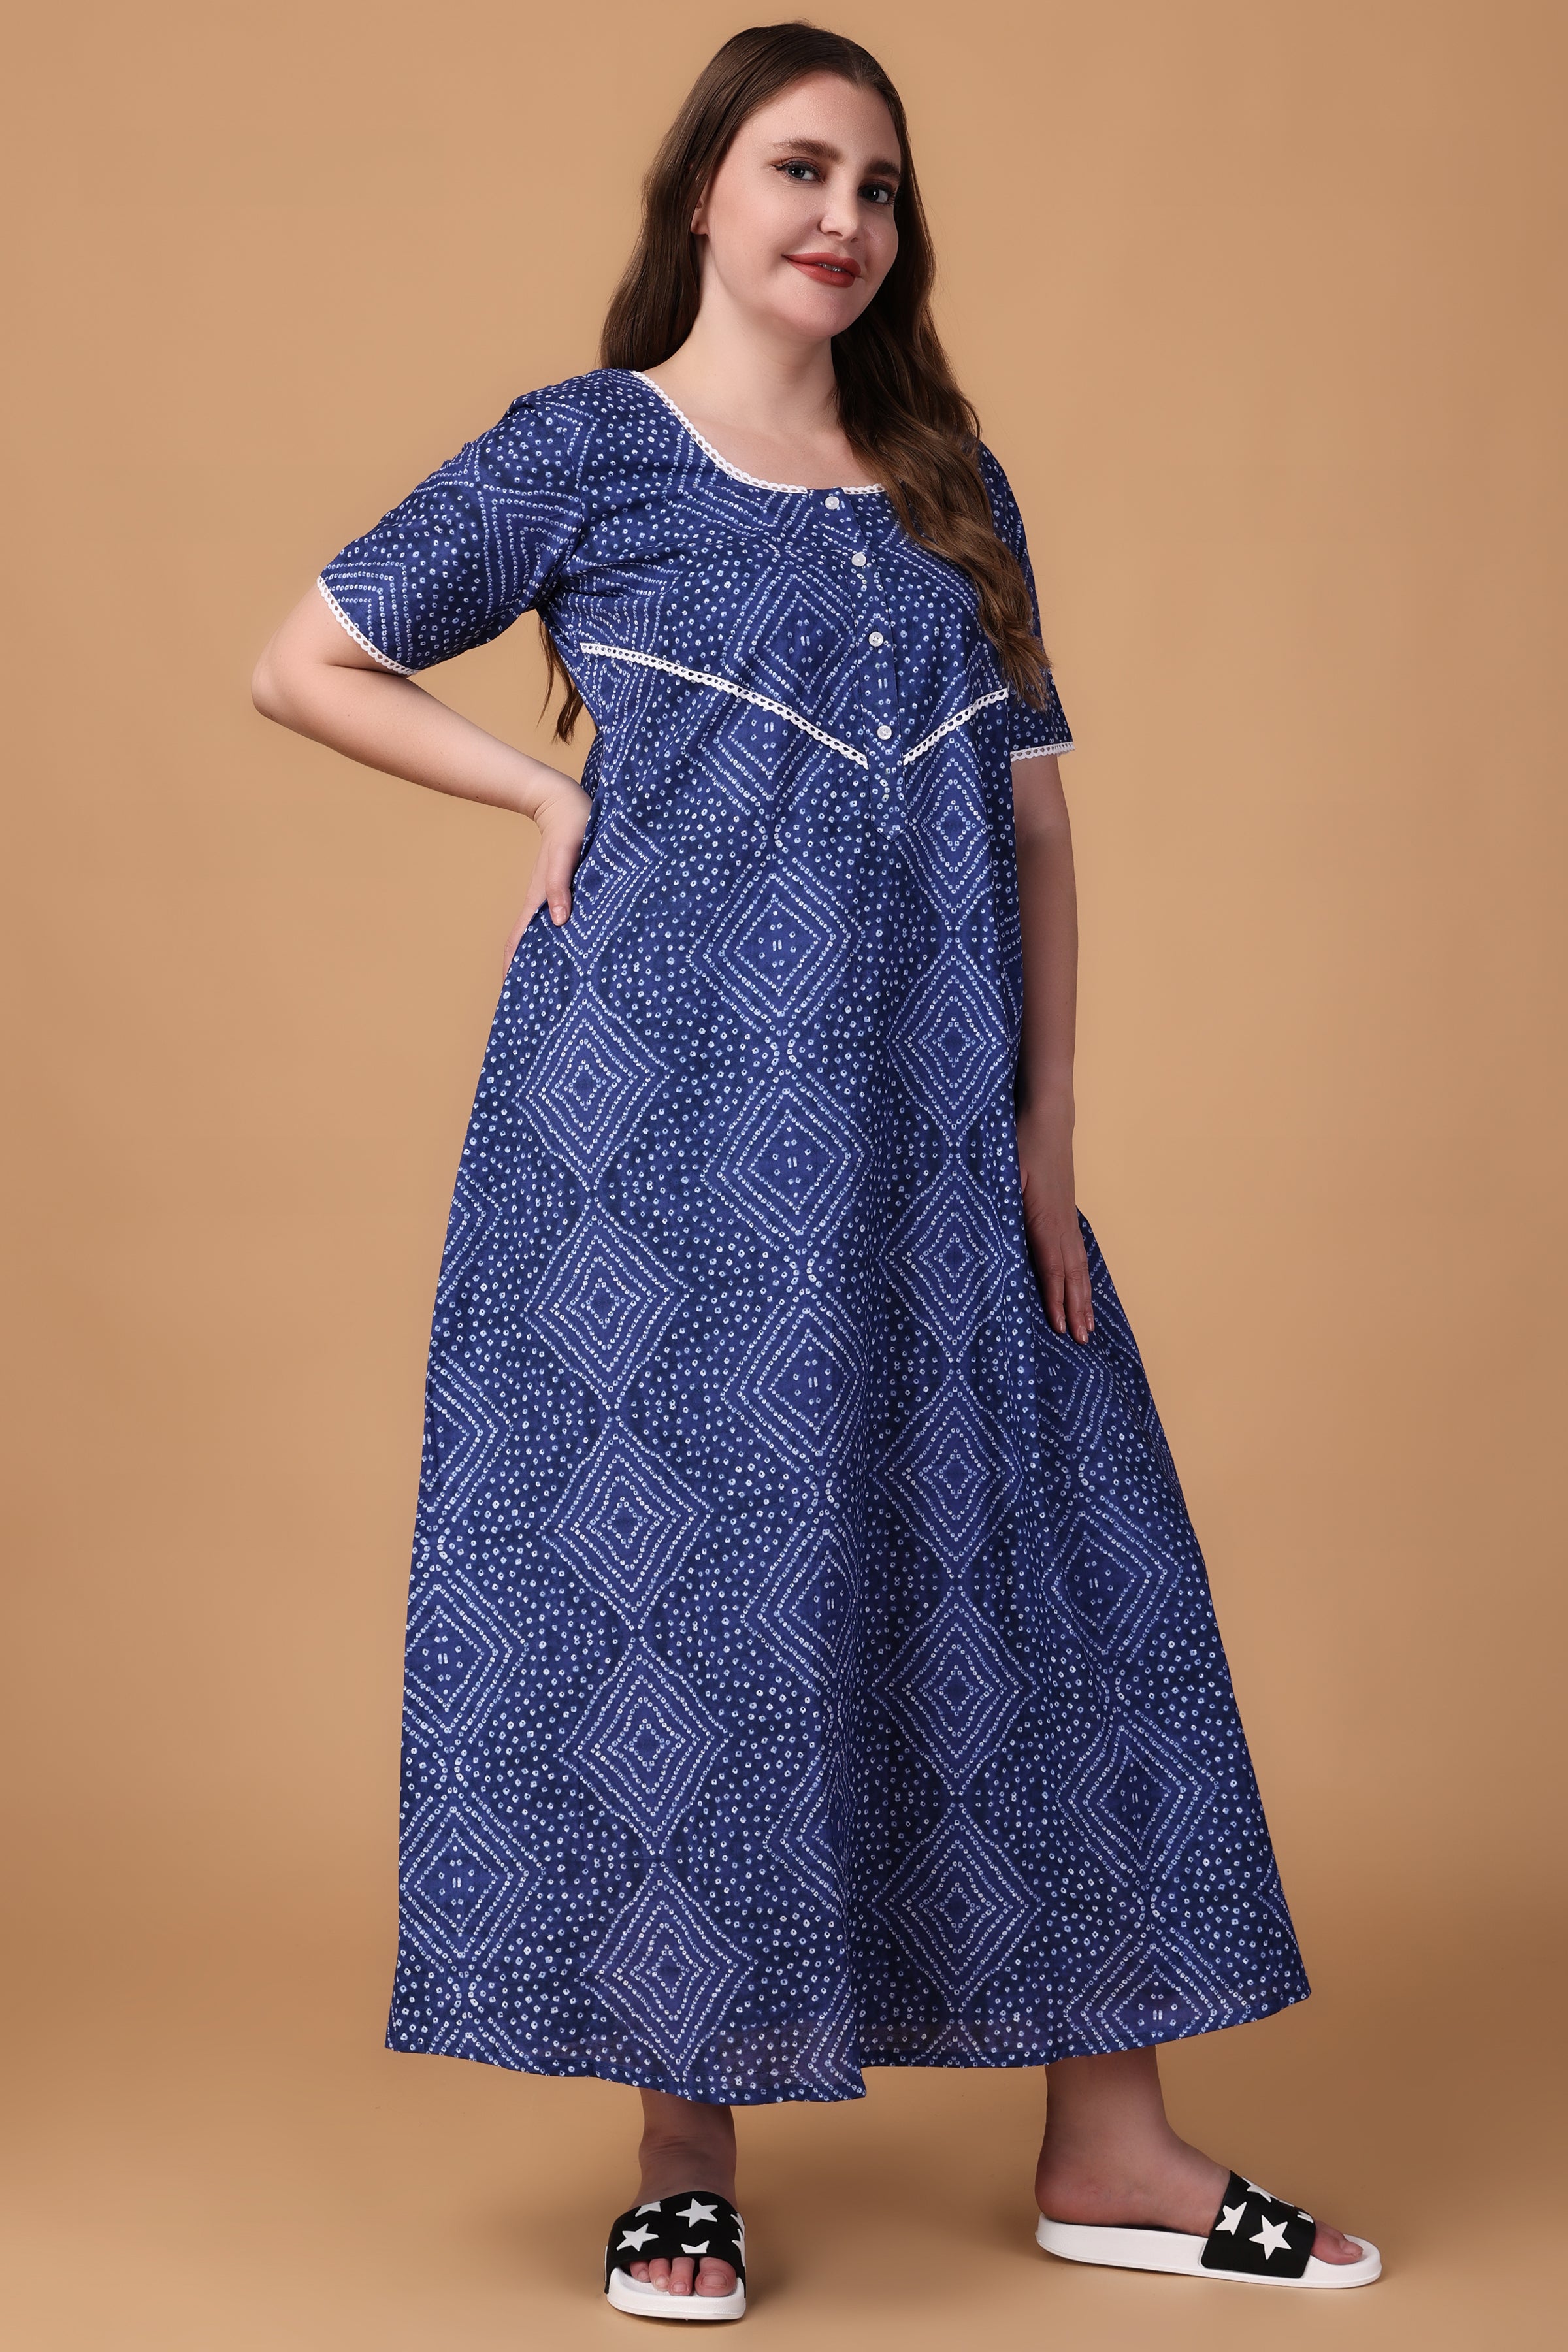 Ladies Nighty, Light Weight Soft Cotton Night Dress, Sleep Wear, Casual Night  Gown, Indian Nightie, India Gown, Short Sleeves Gown, Printed - Etsy